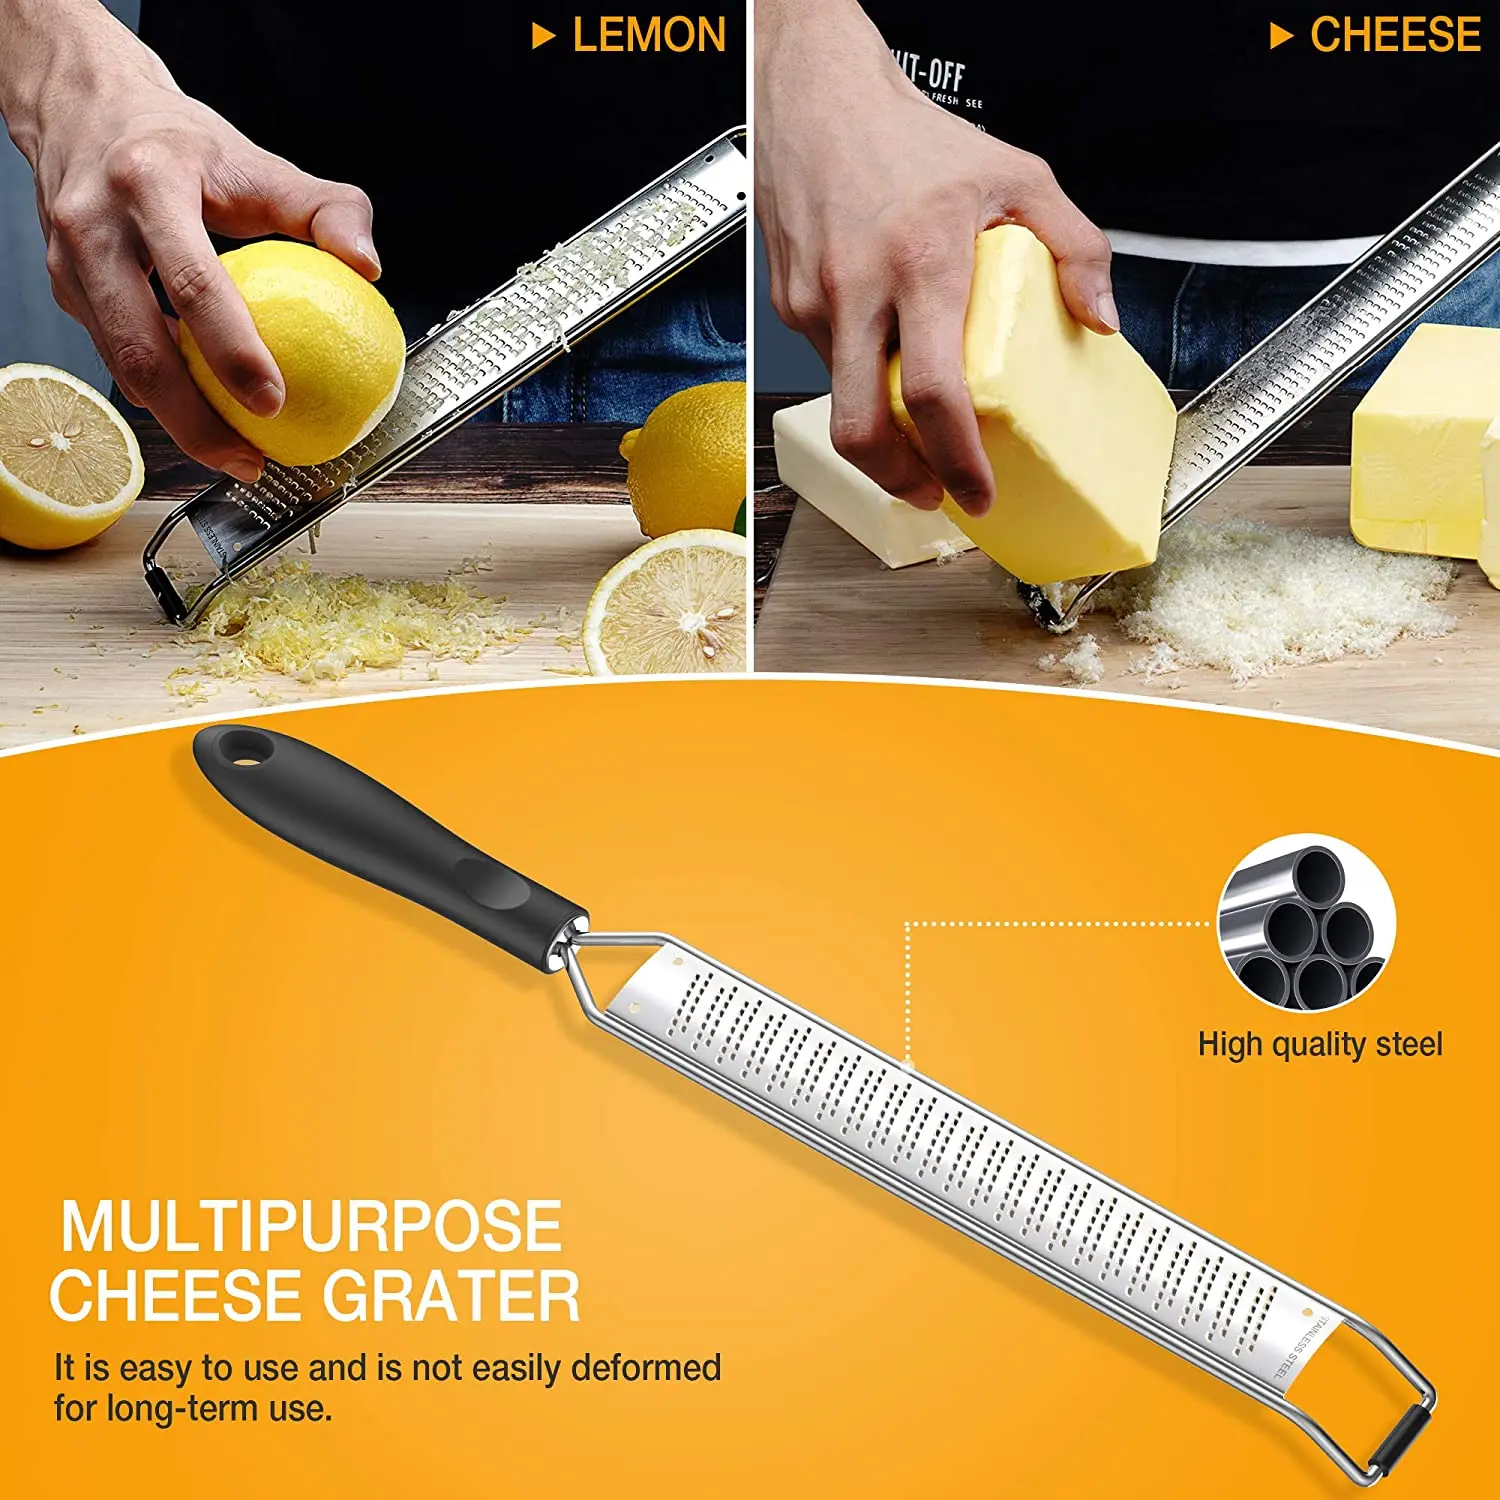 Kitchen Cheese Grater Lemon Zester Sharp Stainless Steel Blade and Ergonomic TPR Handle 3 Graters Set with Cleaning Brush for Fruits Chocolate Garlic Nutmeg Chocolate Ginger 